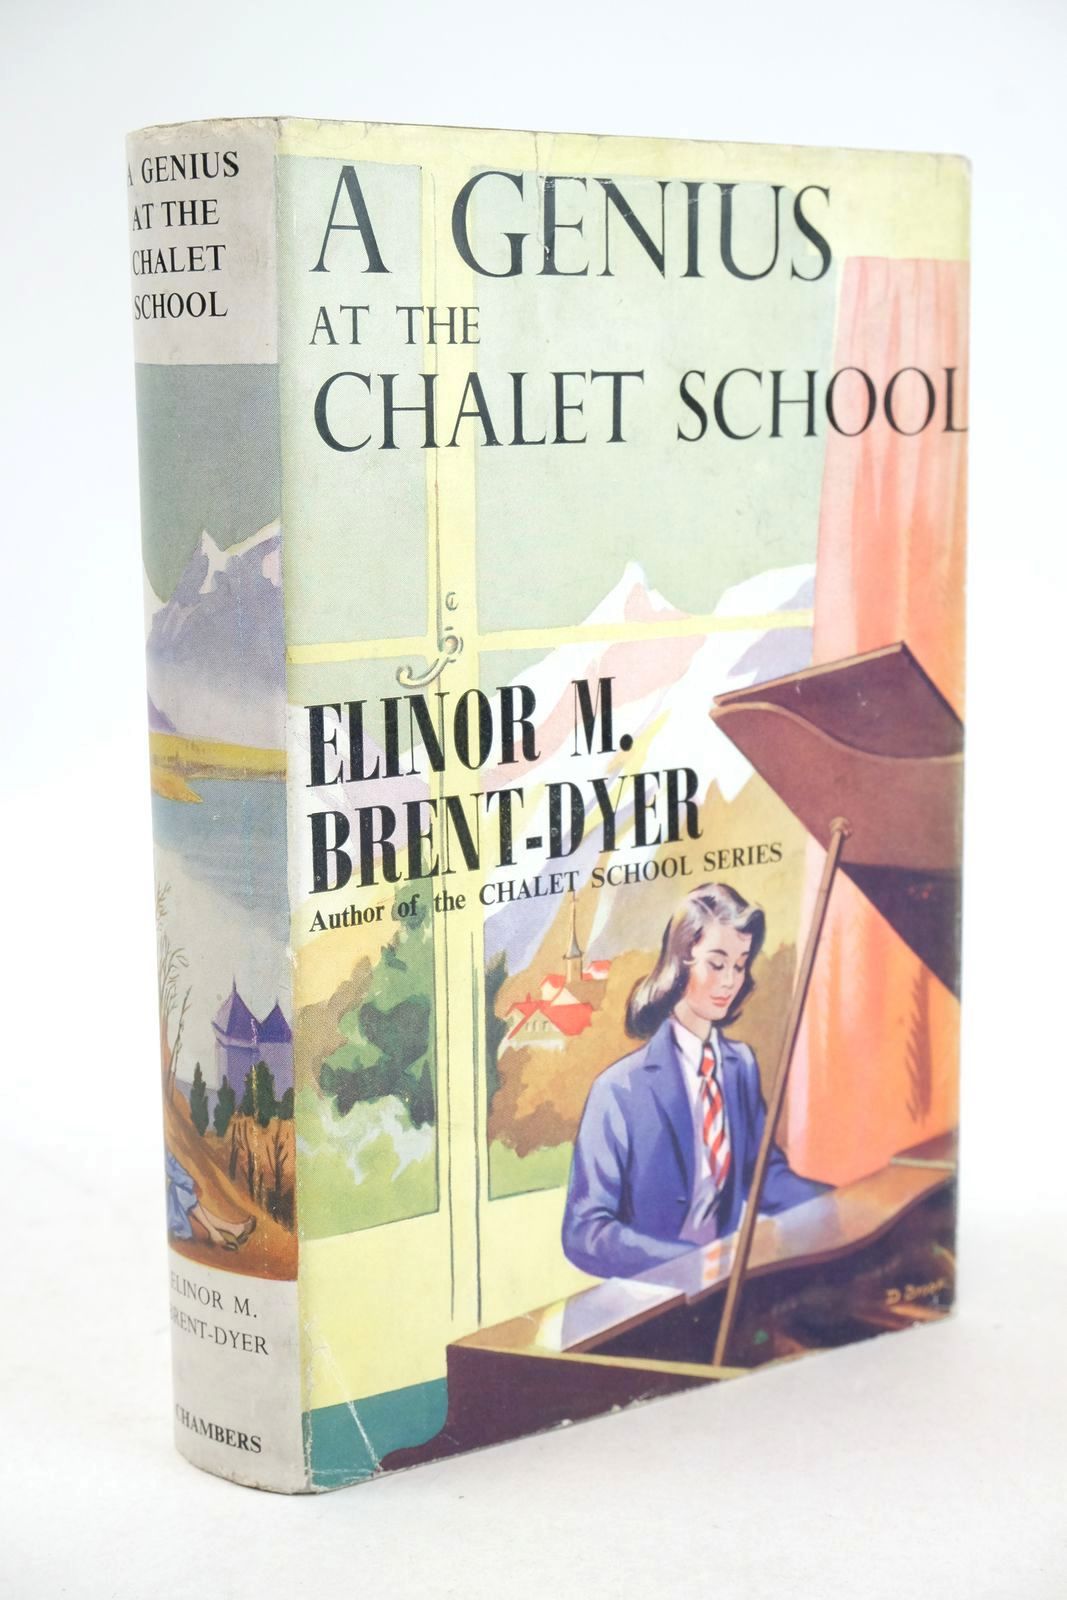 Photo of A GENIUS AT THE CHALET SCHOOL written by Brent-Dyer, Elinor M. published by W. &amp; R. Chambers Limited (STOCK CODE: 1325647)  for sale by Stella & Rose's Books